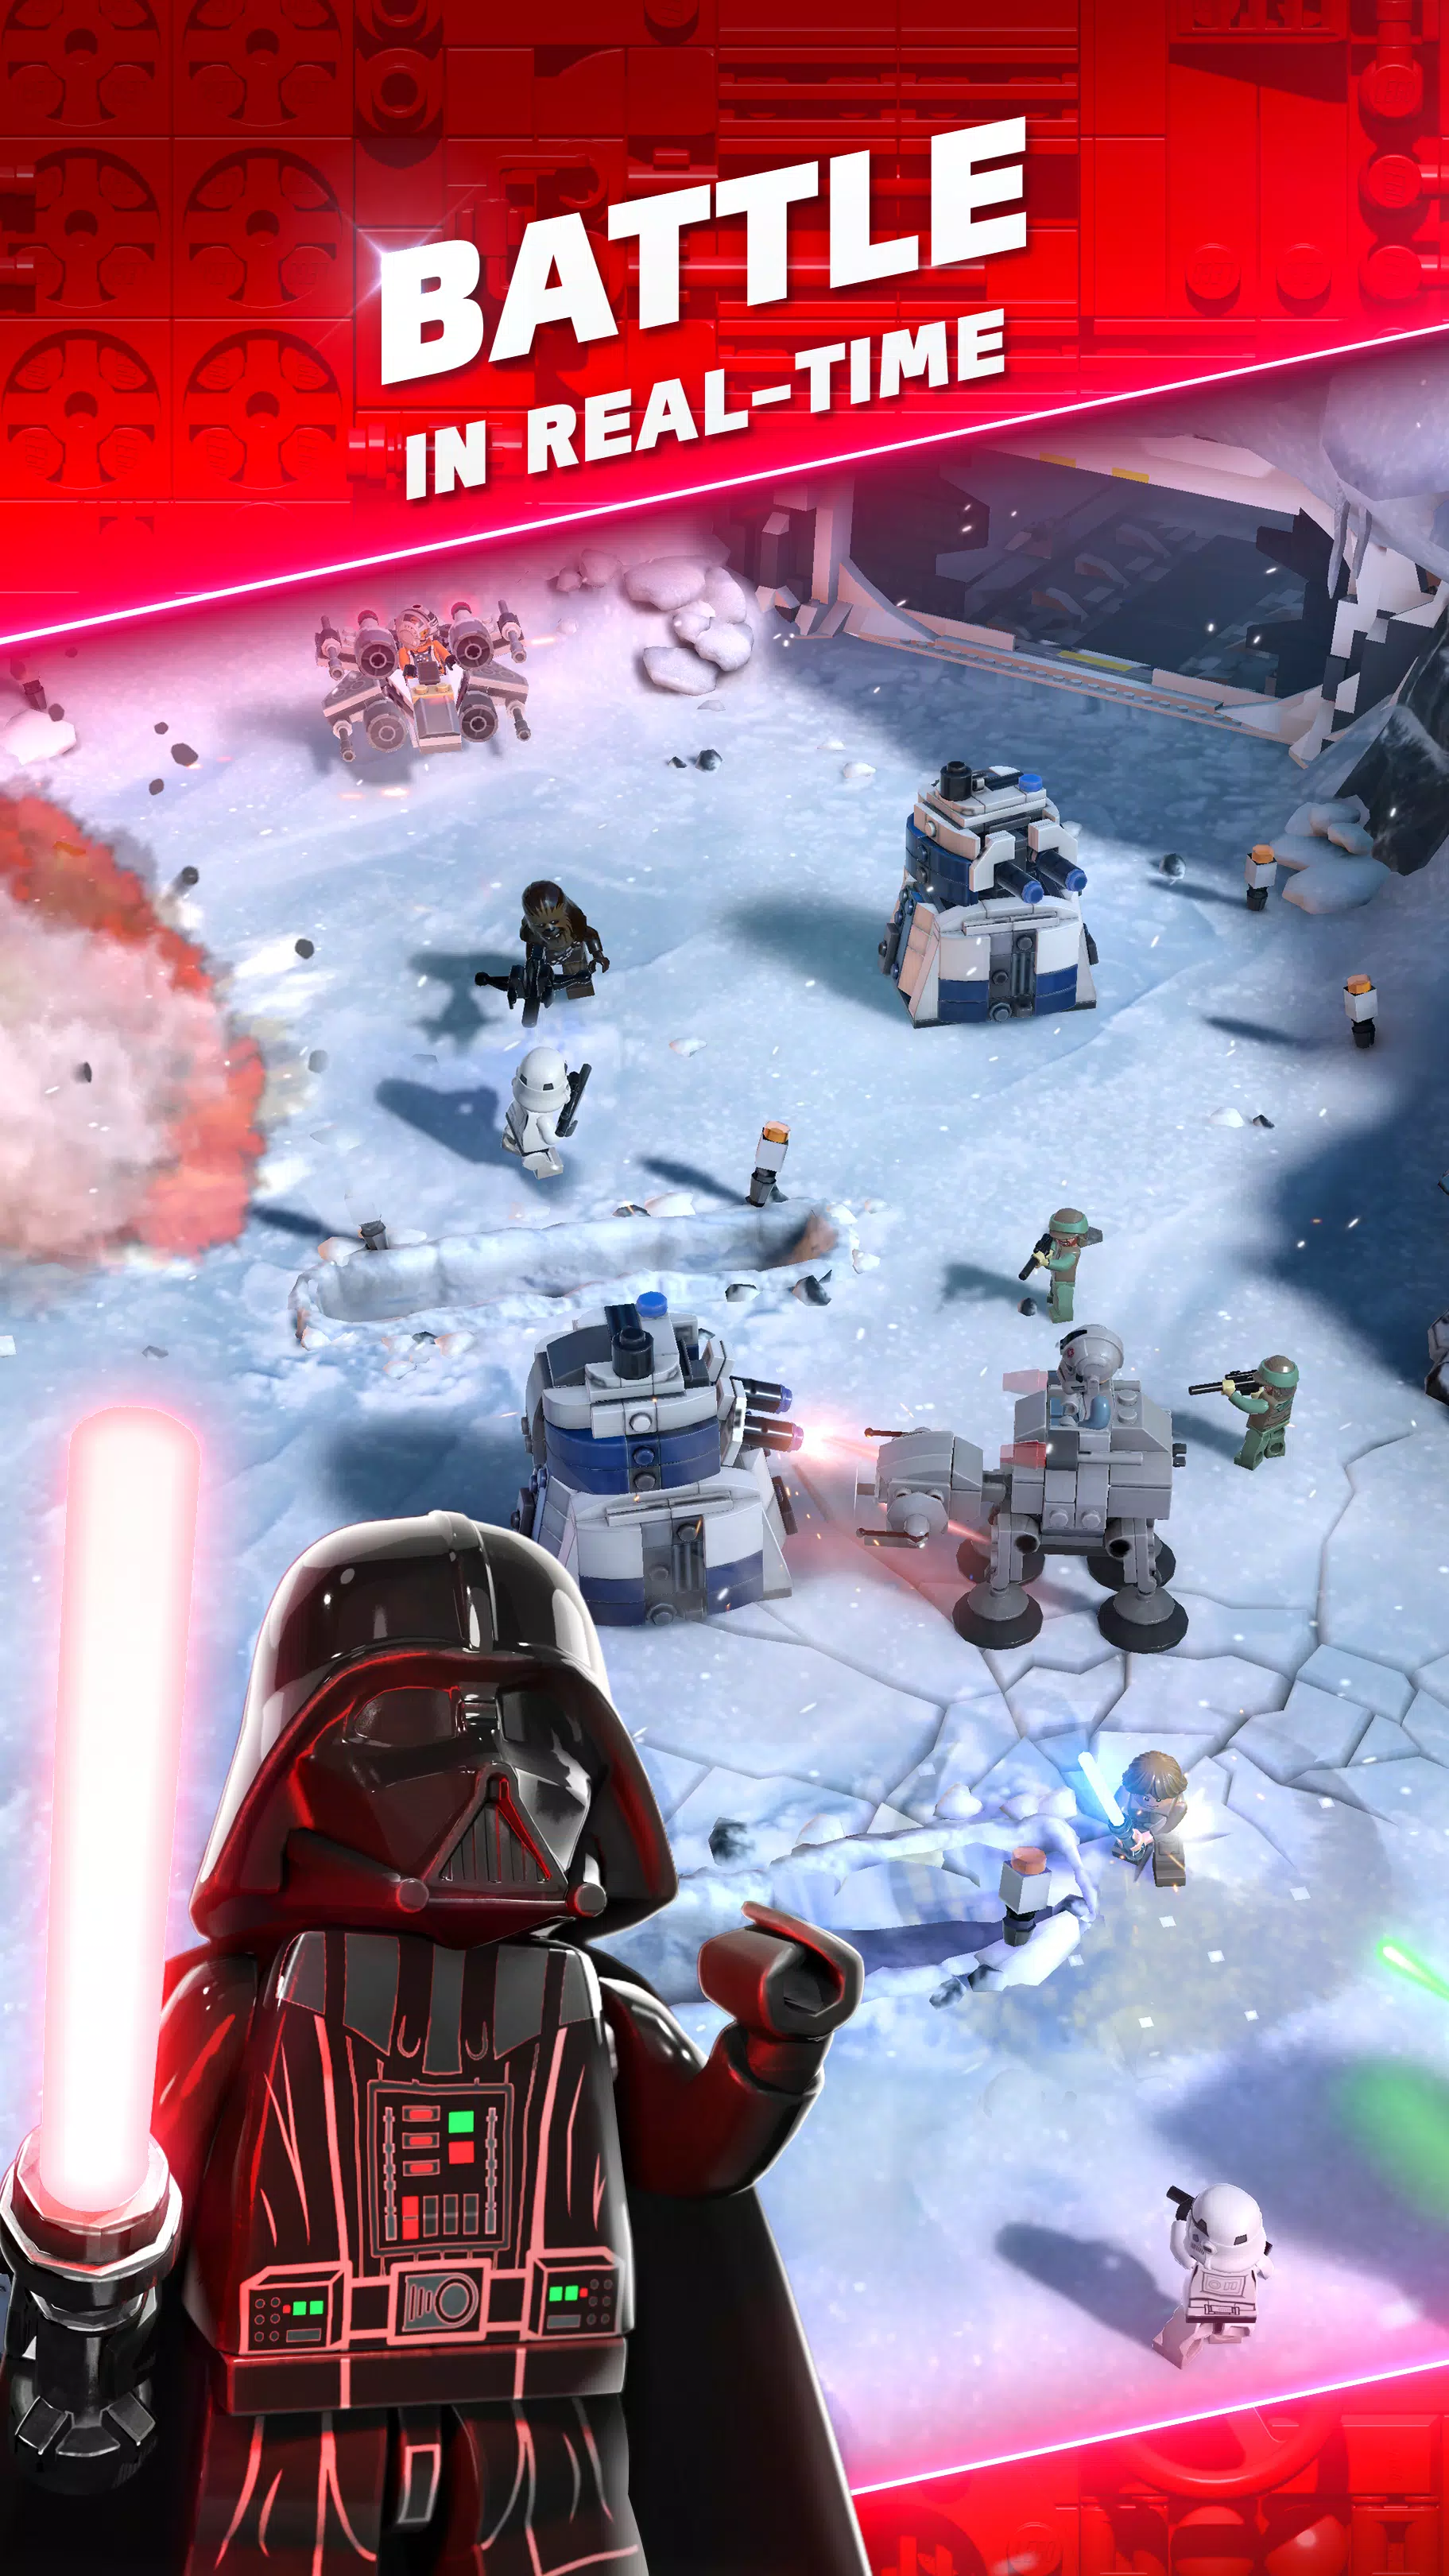 LEGO® Star Wars™: TCS - Apps on Google Play